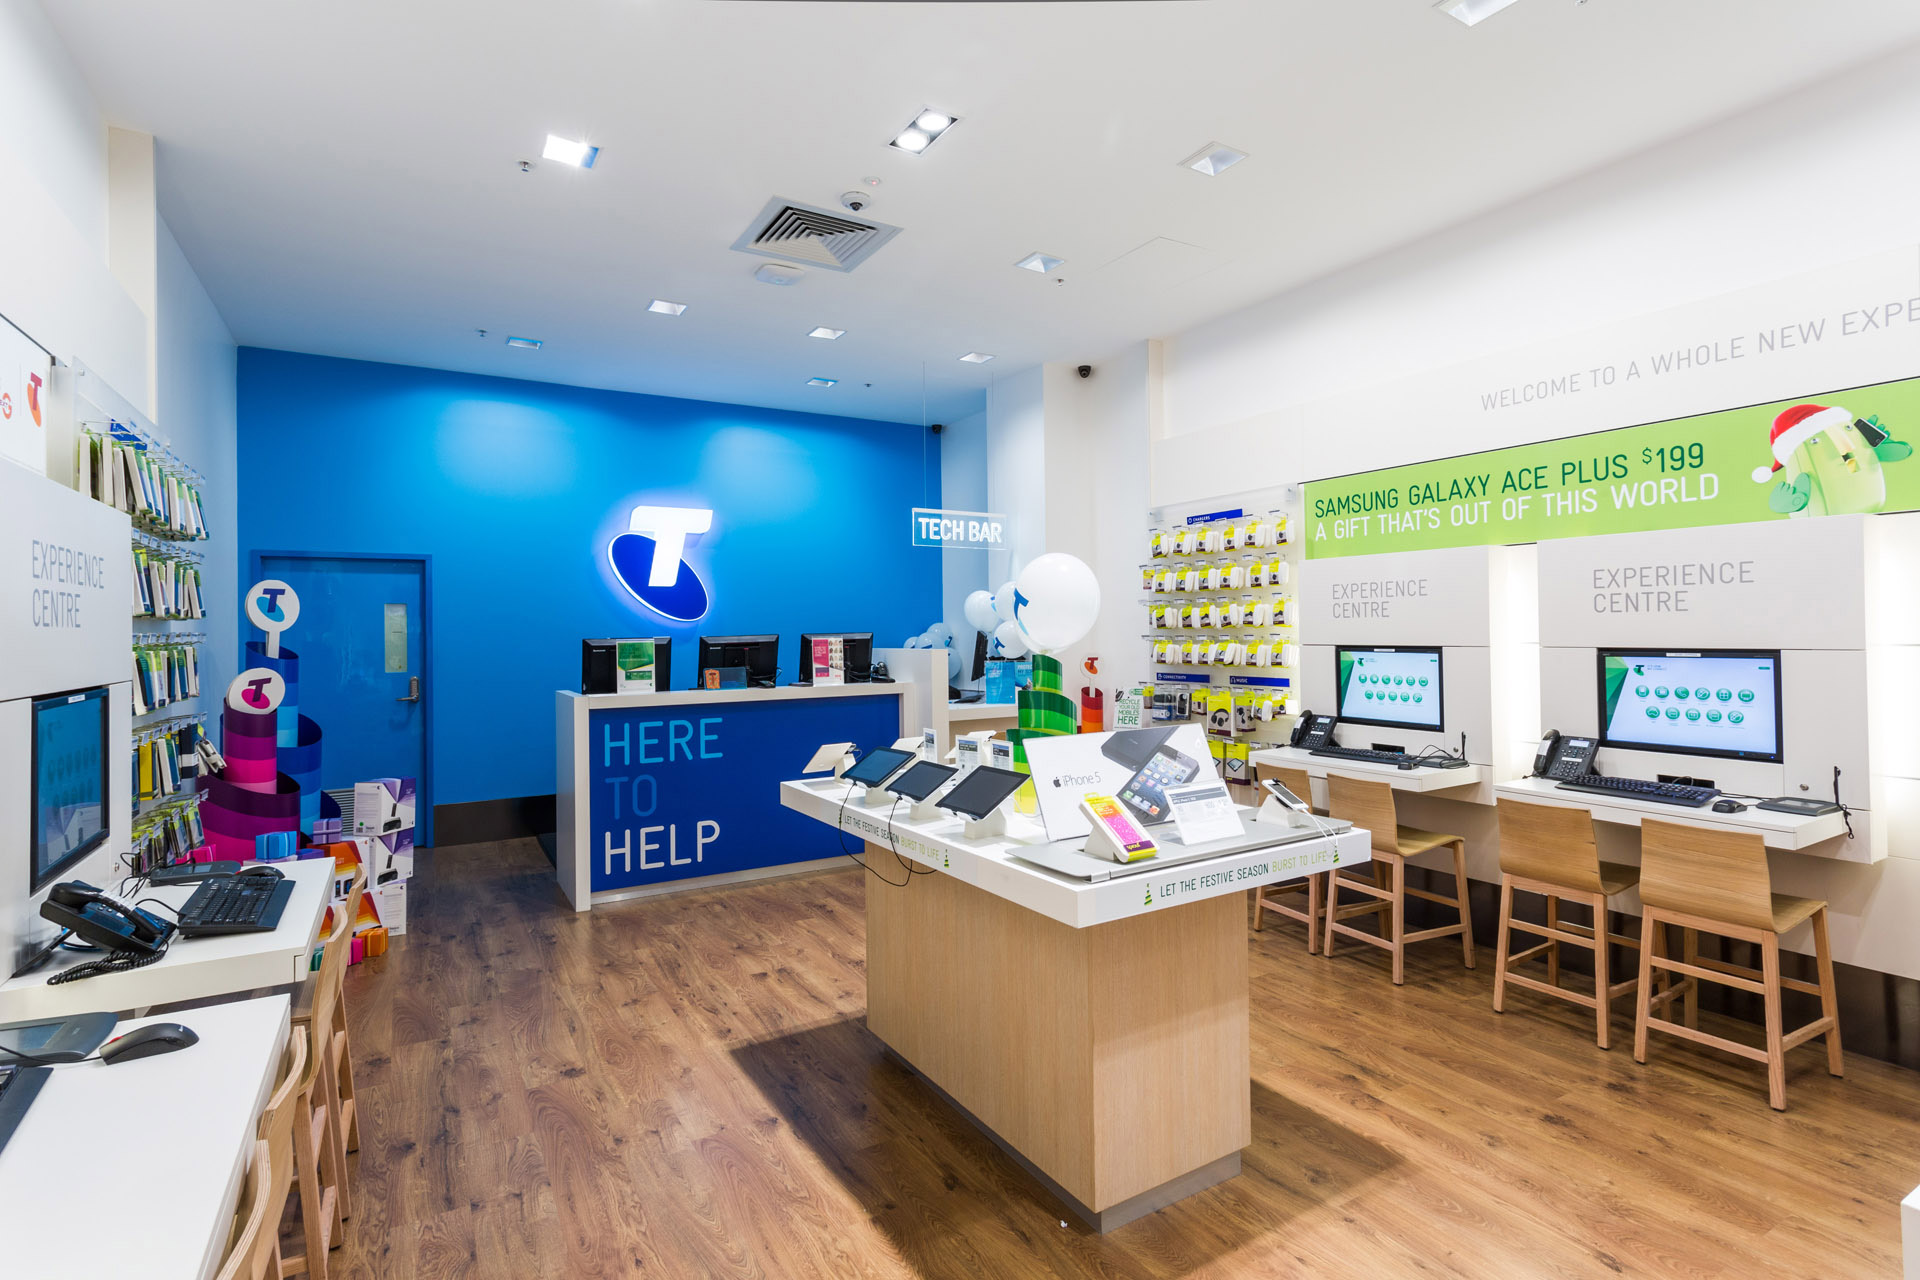 IF-project-telstra-townsville_081212_018